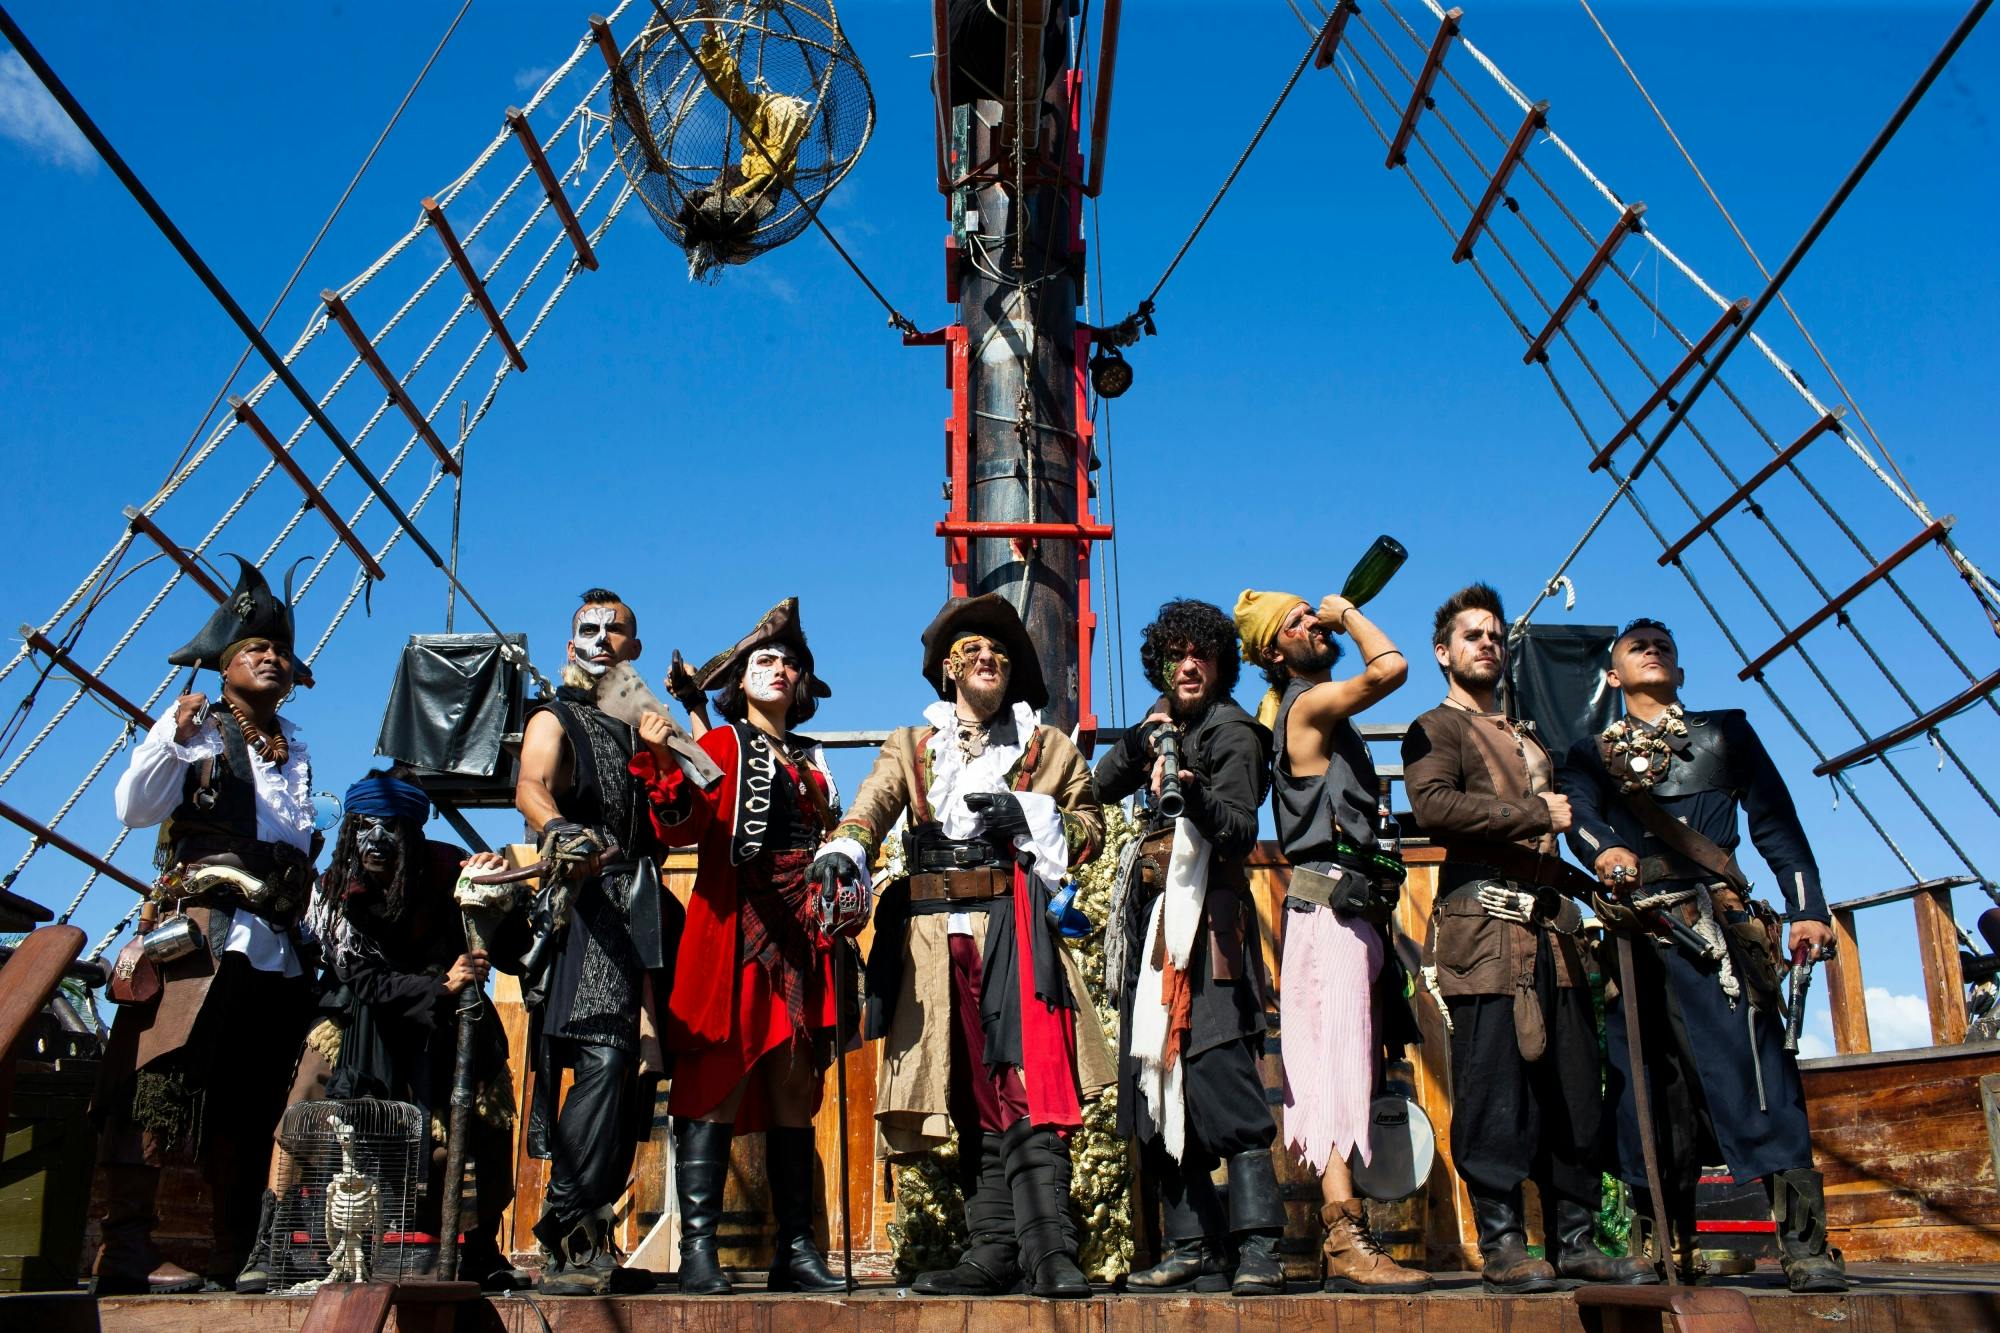 Jolly Roger Deluxe Pirate Cruise Ticket